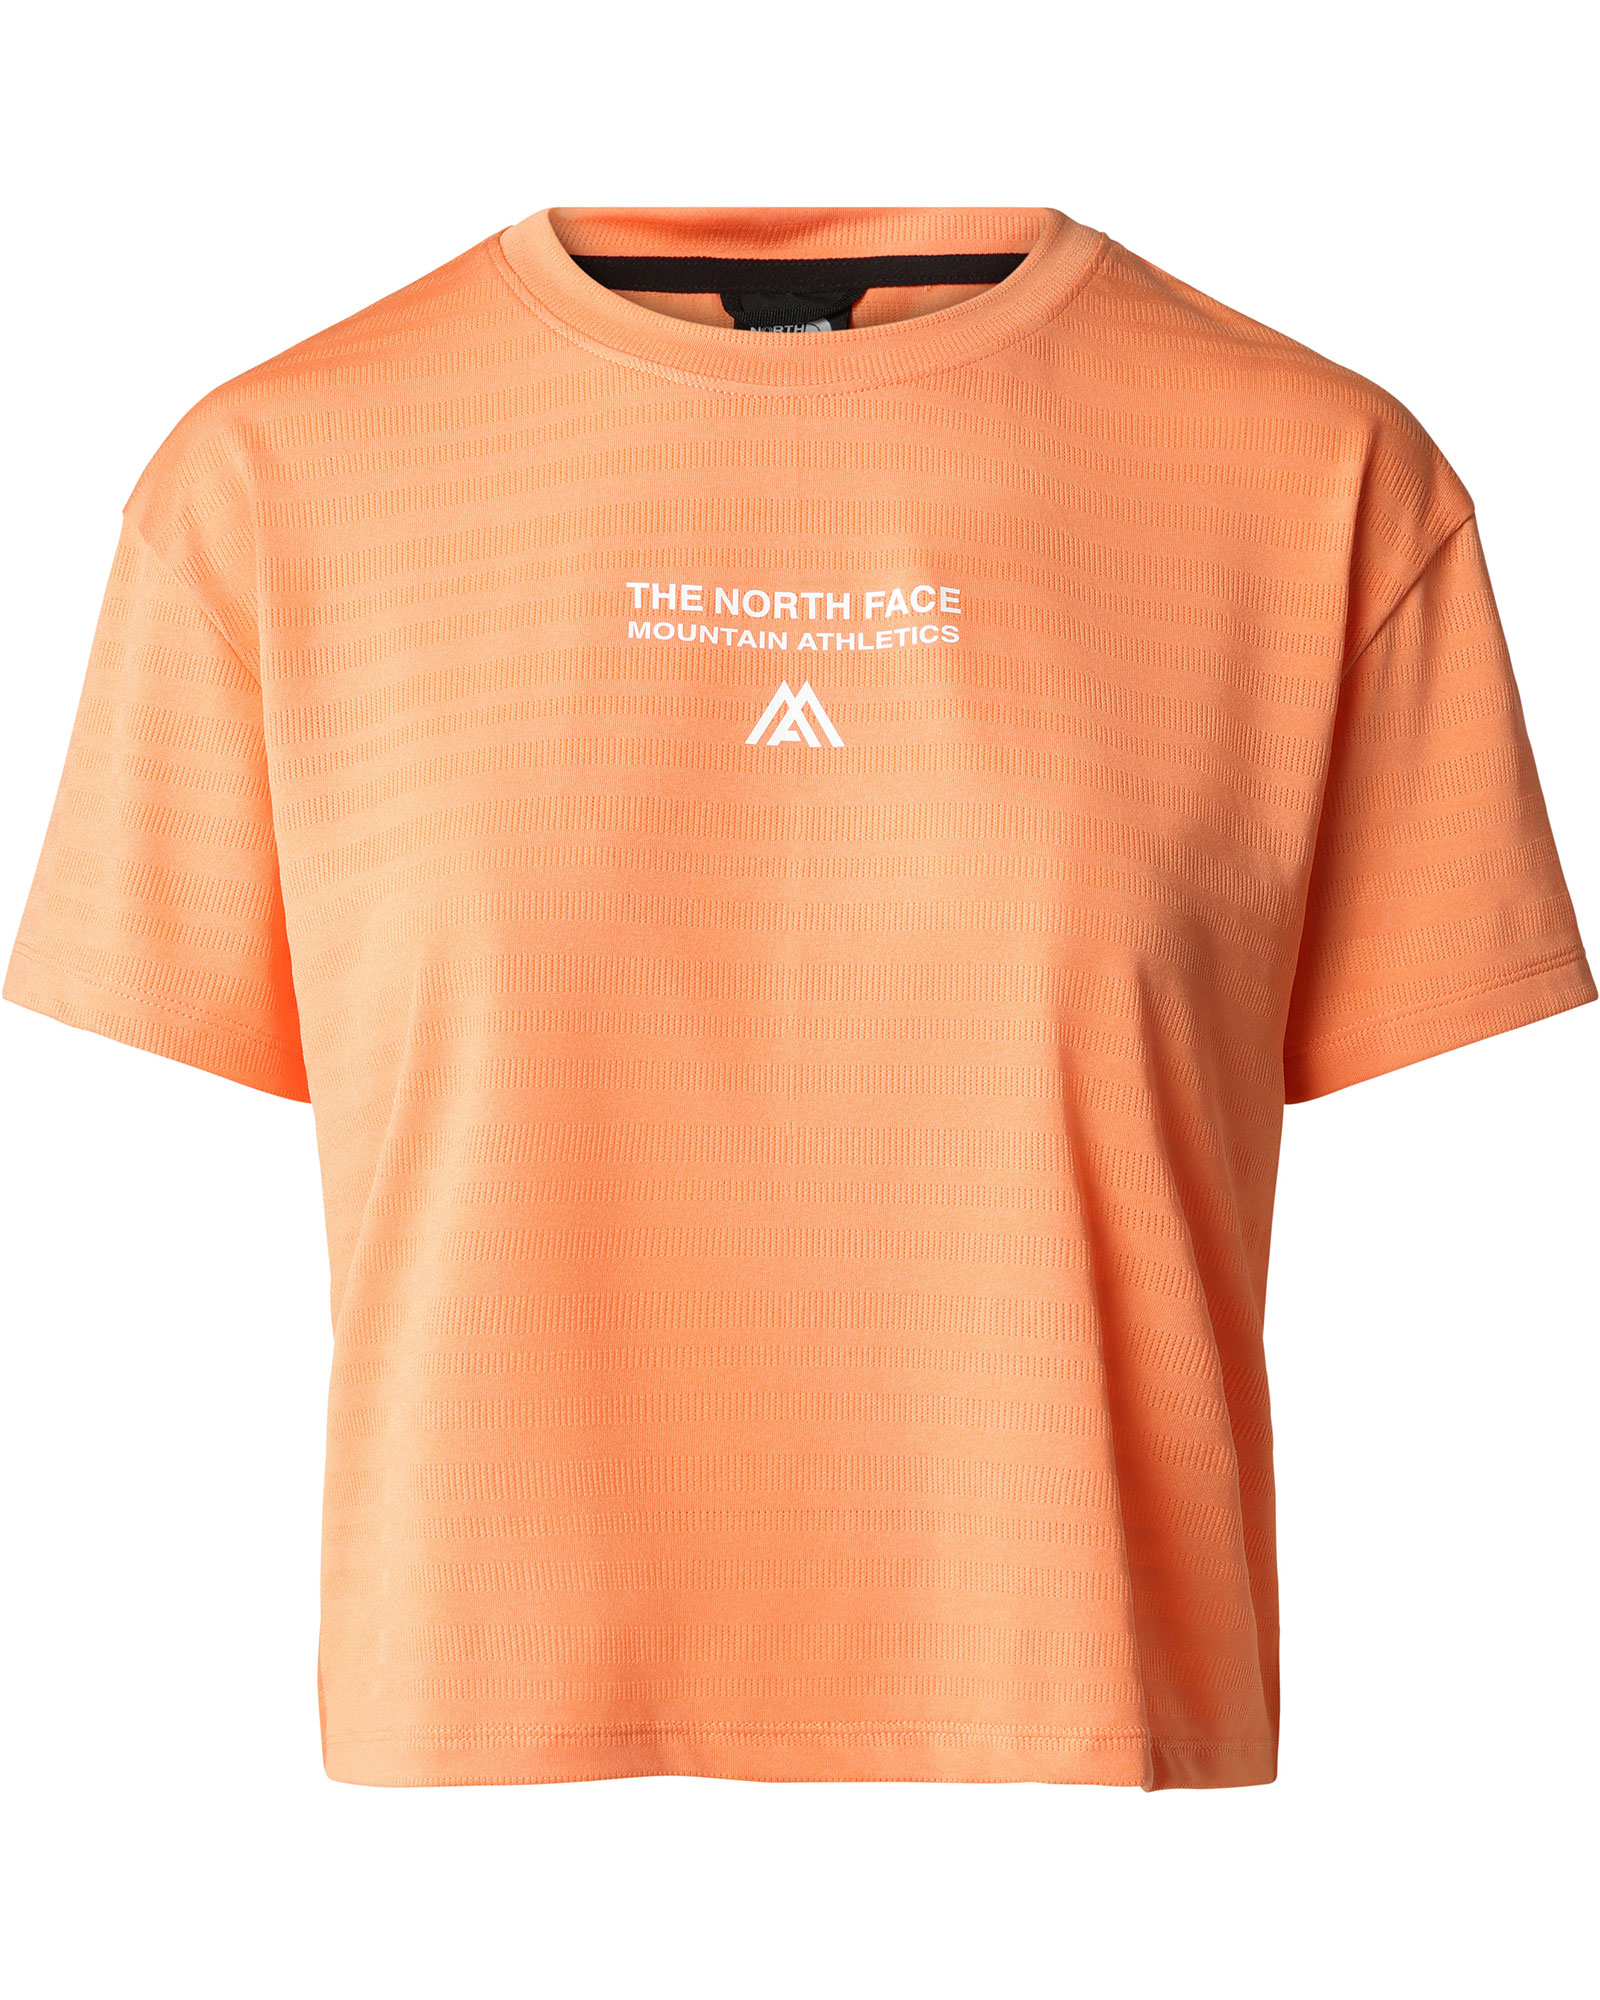 The North Face Women’s MA T Shirt - Dusty Coral Orange L